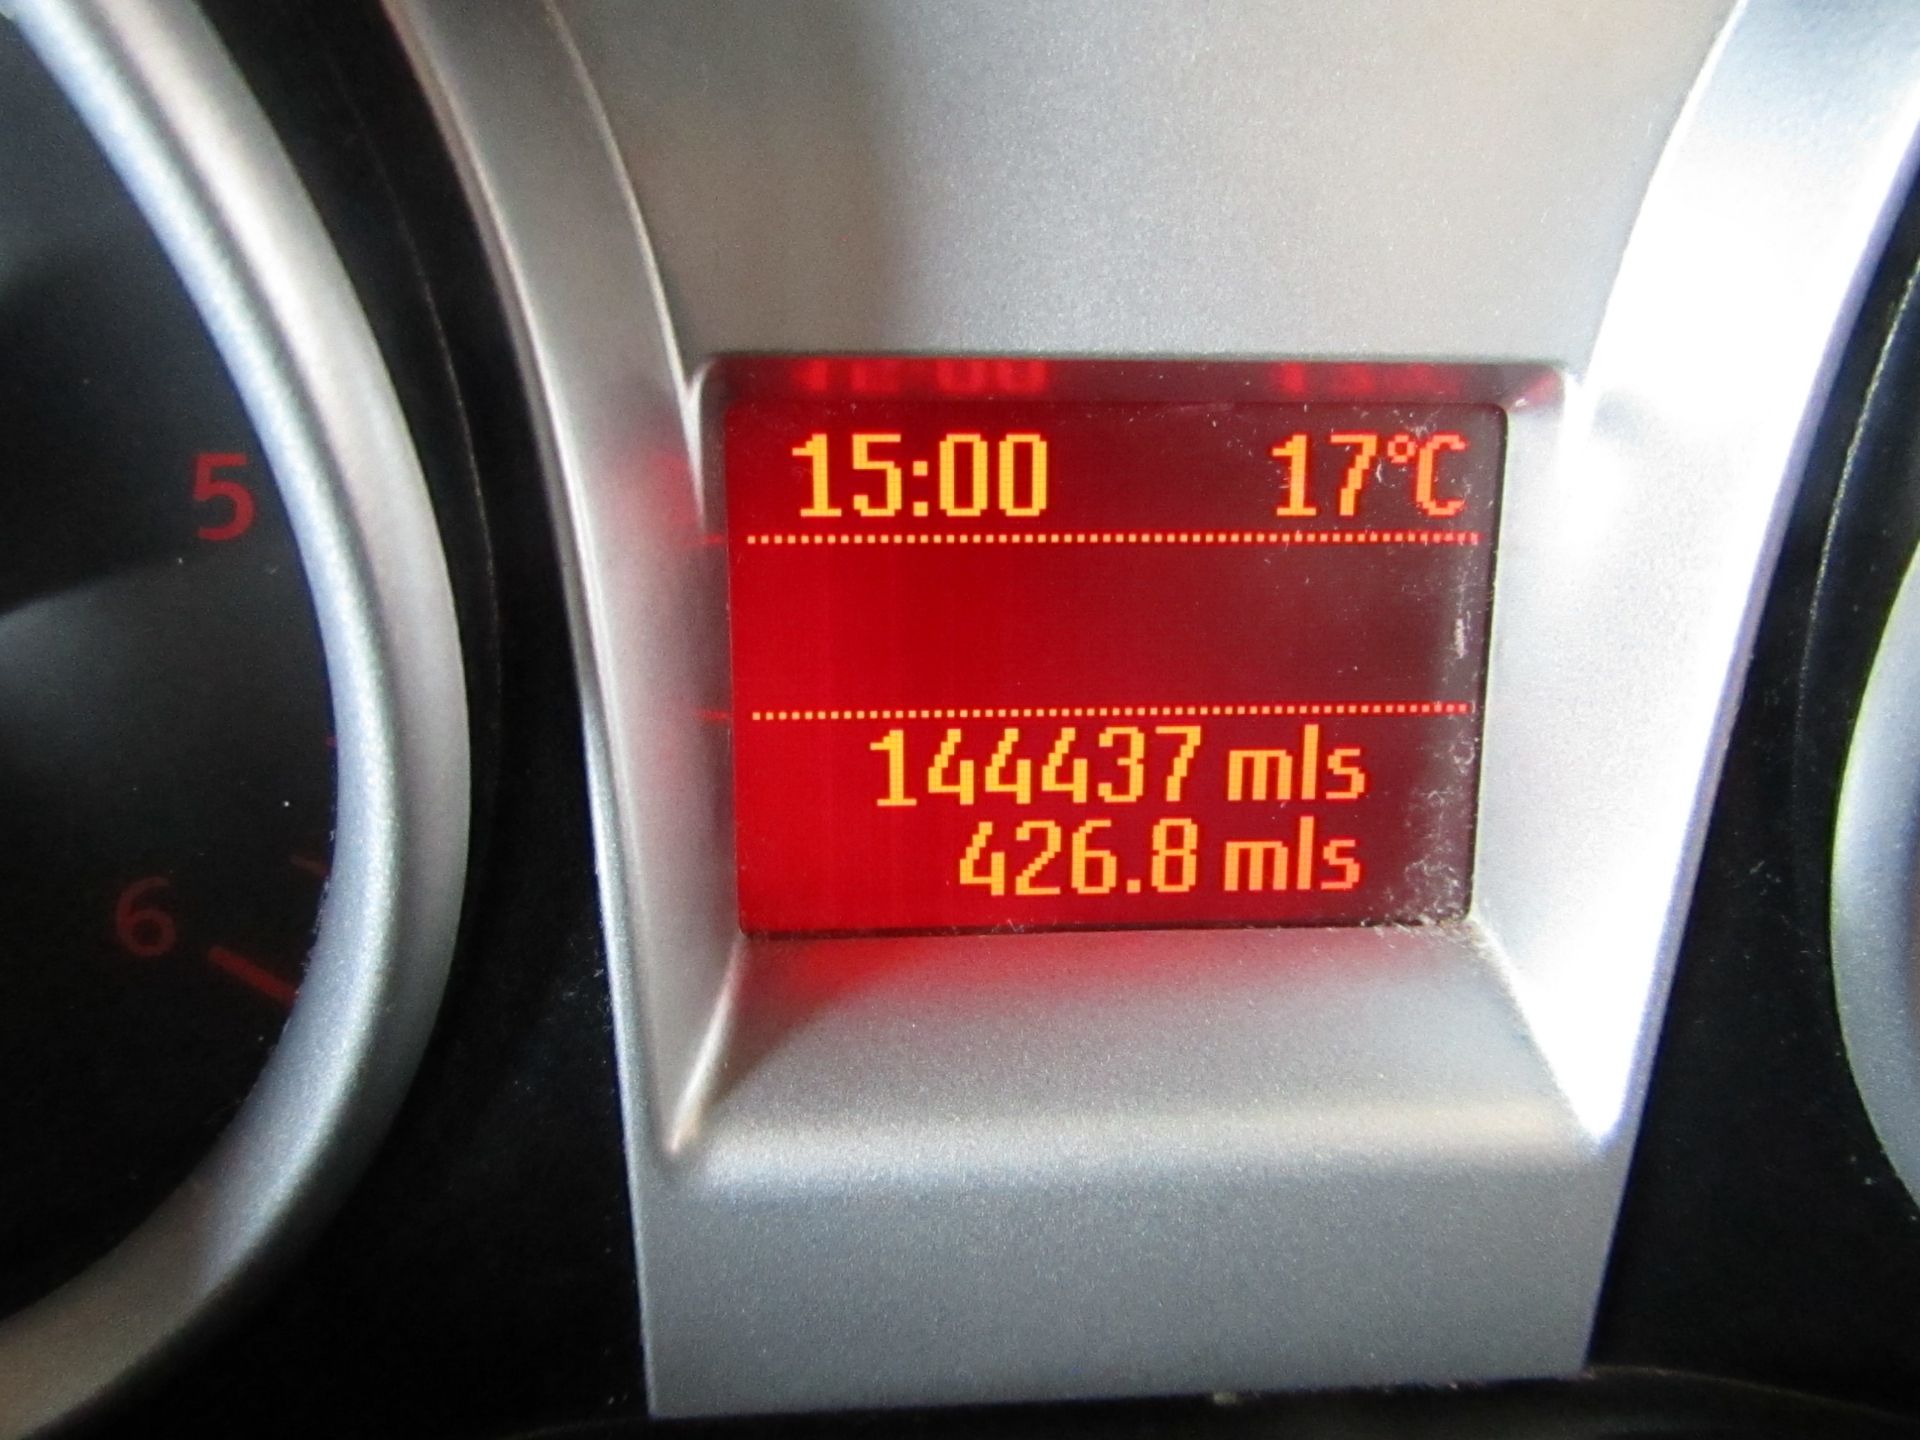 2009 Ford Kuga Titaniumÿ 2.0 TDCI, 144,437 miles (unchecked but appear to be in line with previous - Image 7 of 19